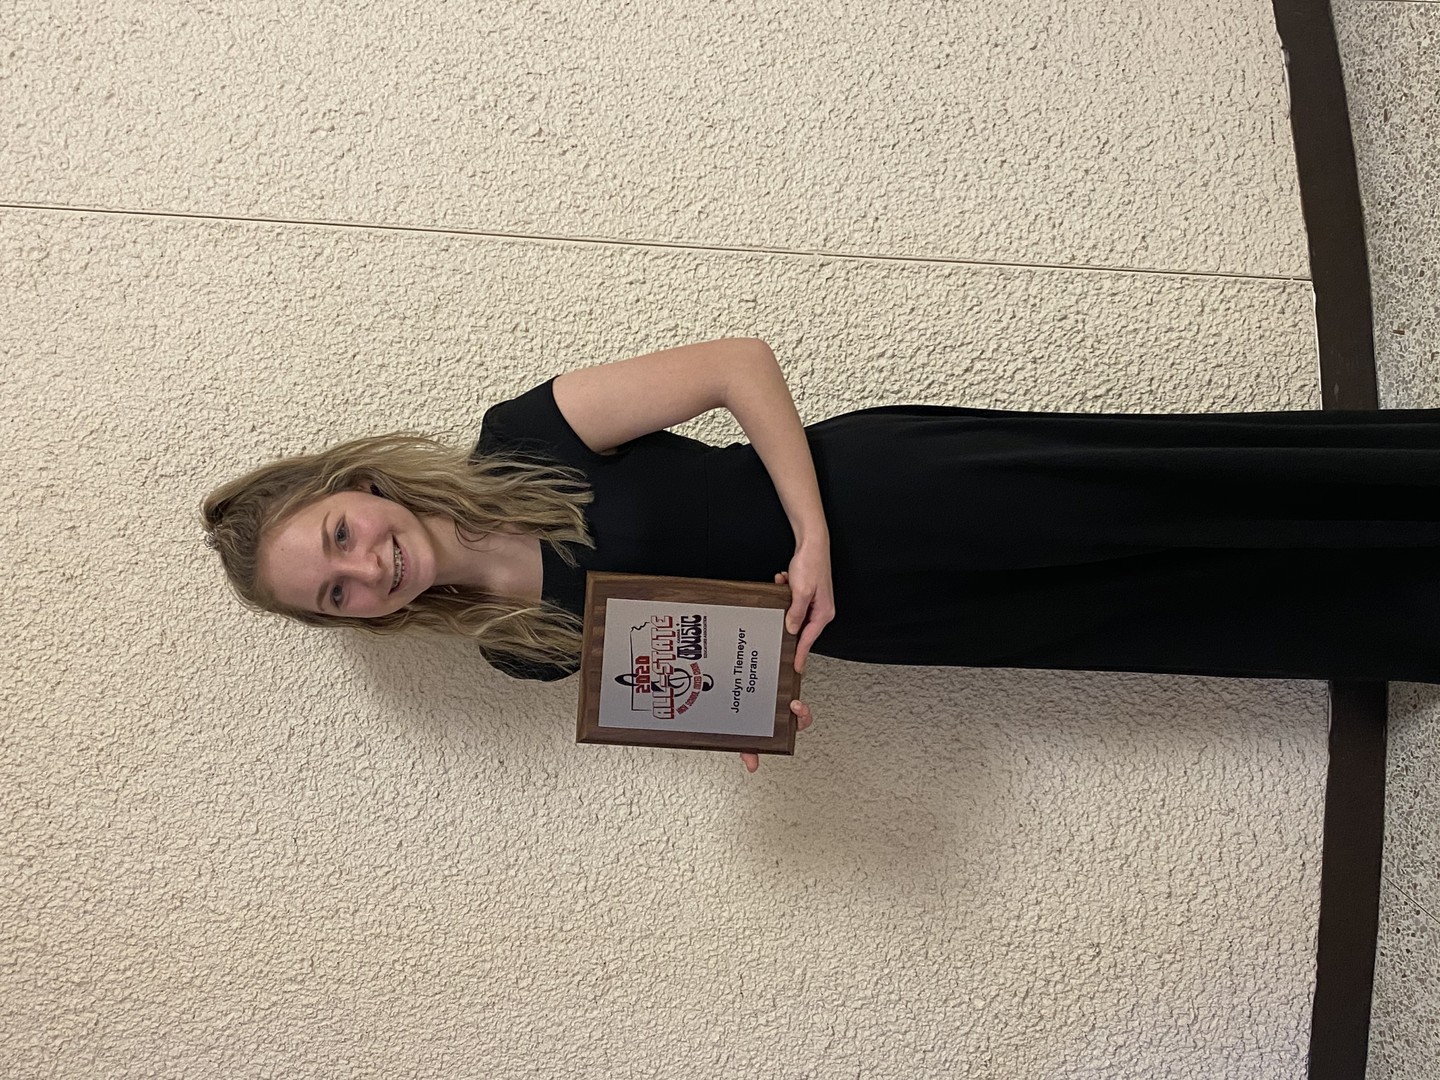 Jordyn Tiemeyer was selected as a Soprano I to be a member of the All-State Mixed Choir that performed at century II in Wichita on Sat Feb 29. There were over 2000 students who competed State-wide to be a part of this choir of 256. Jordyn was one of 5 freshman to be a part of this Choir.